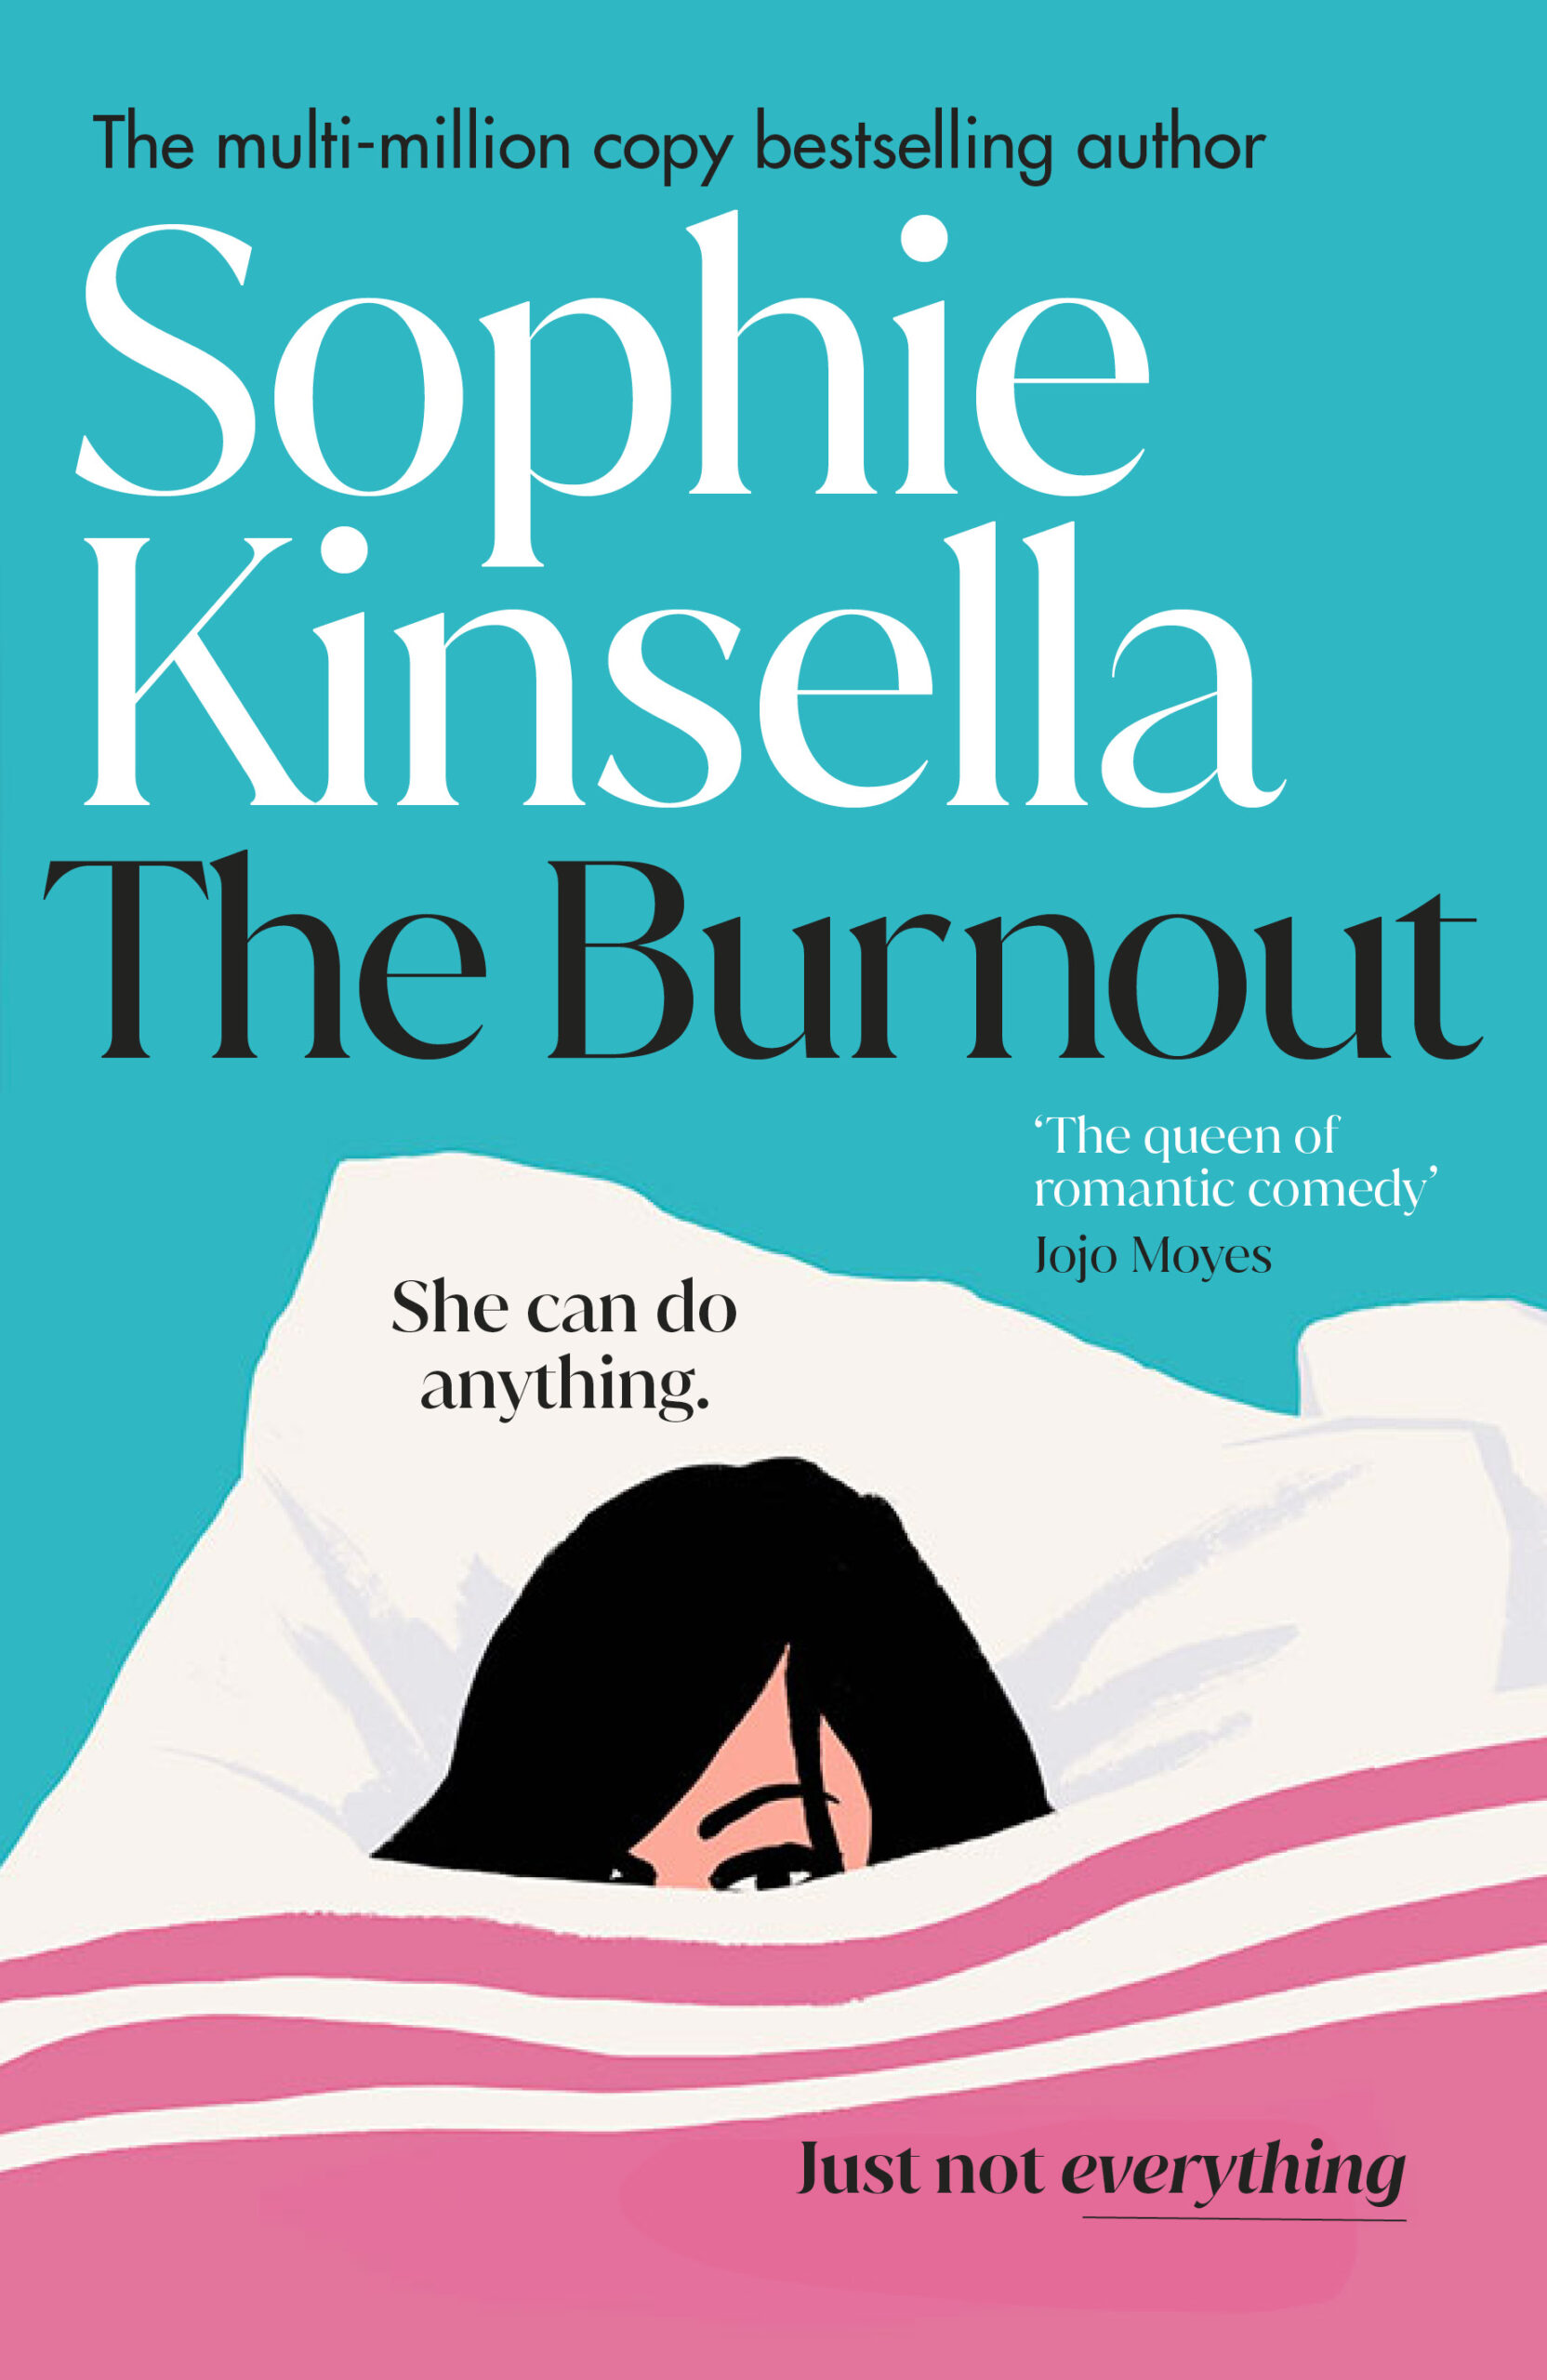 REVIEW: Love Your Life by Sophie Kinsella – Sam Still Reading